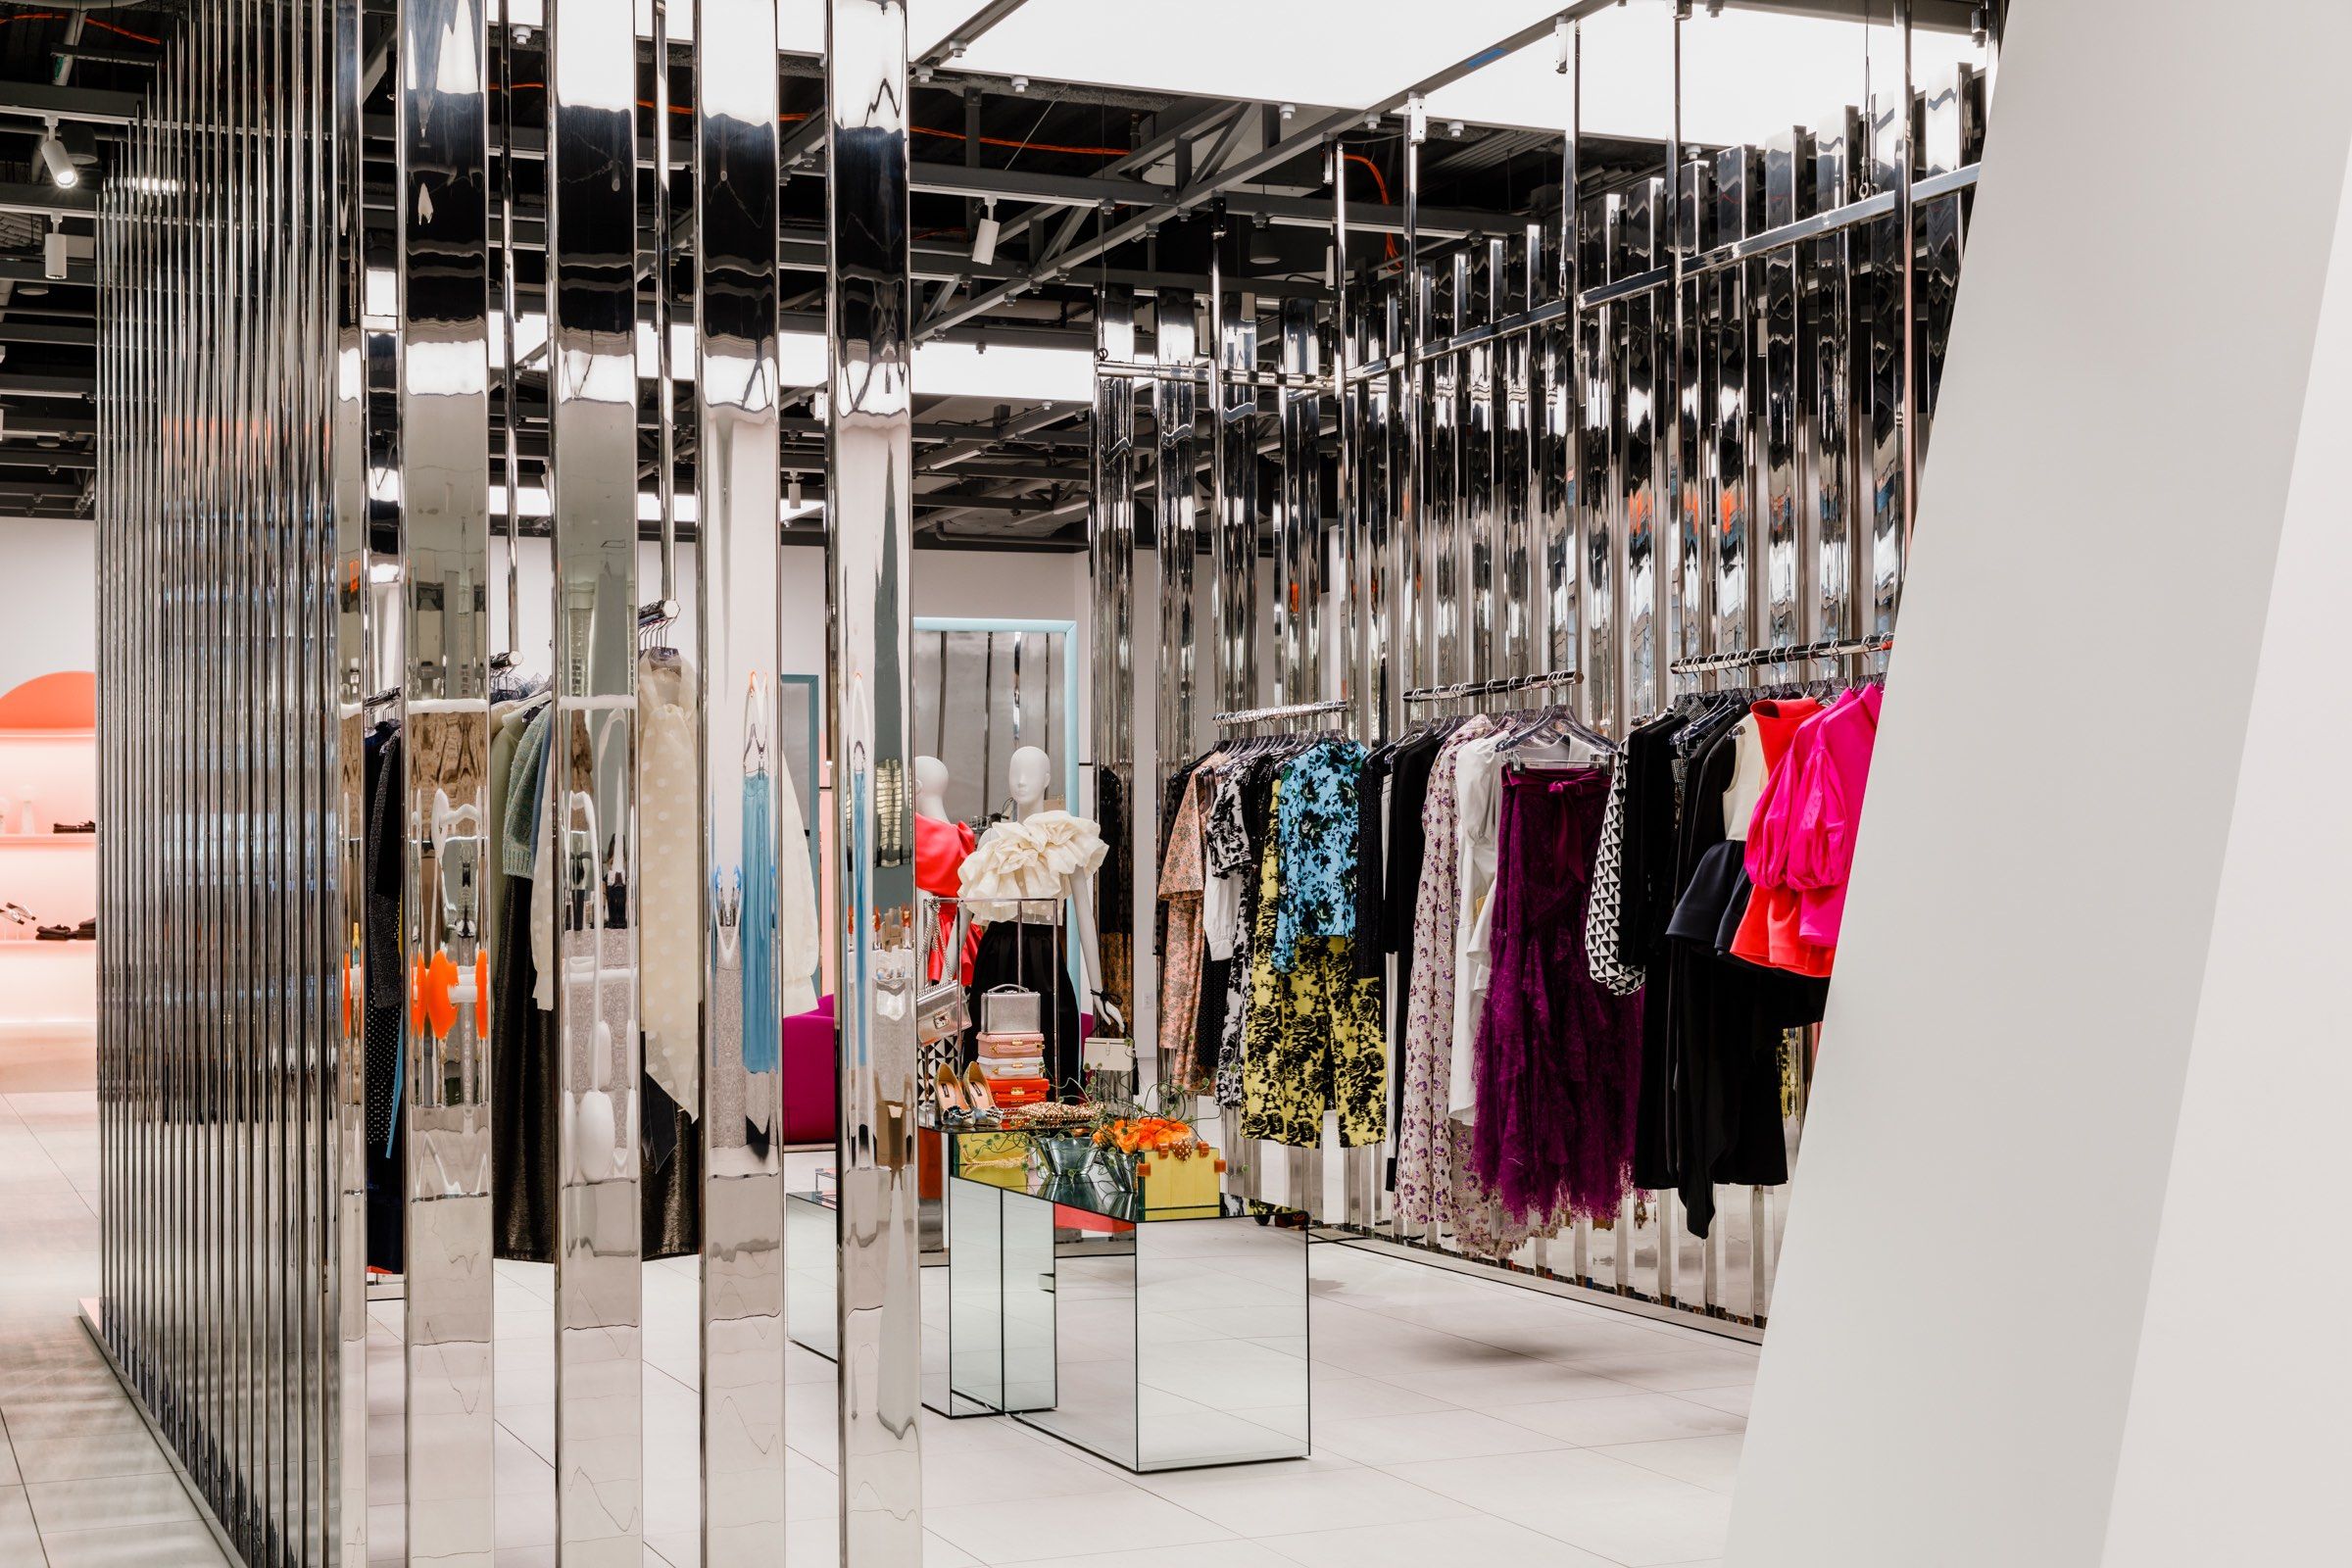 Design Elements in Your Favorite Fashion Boutiques